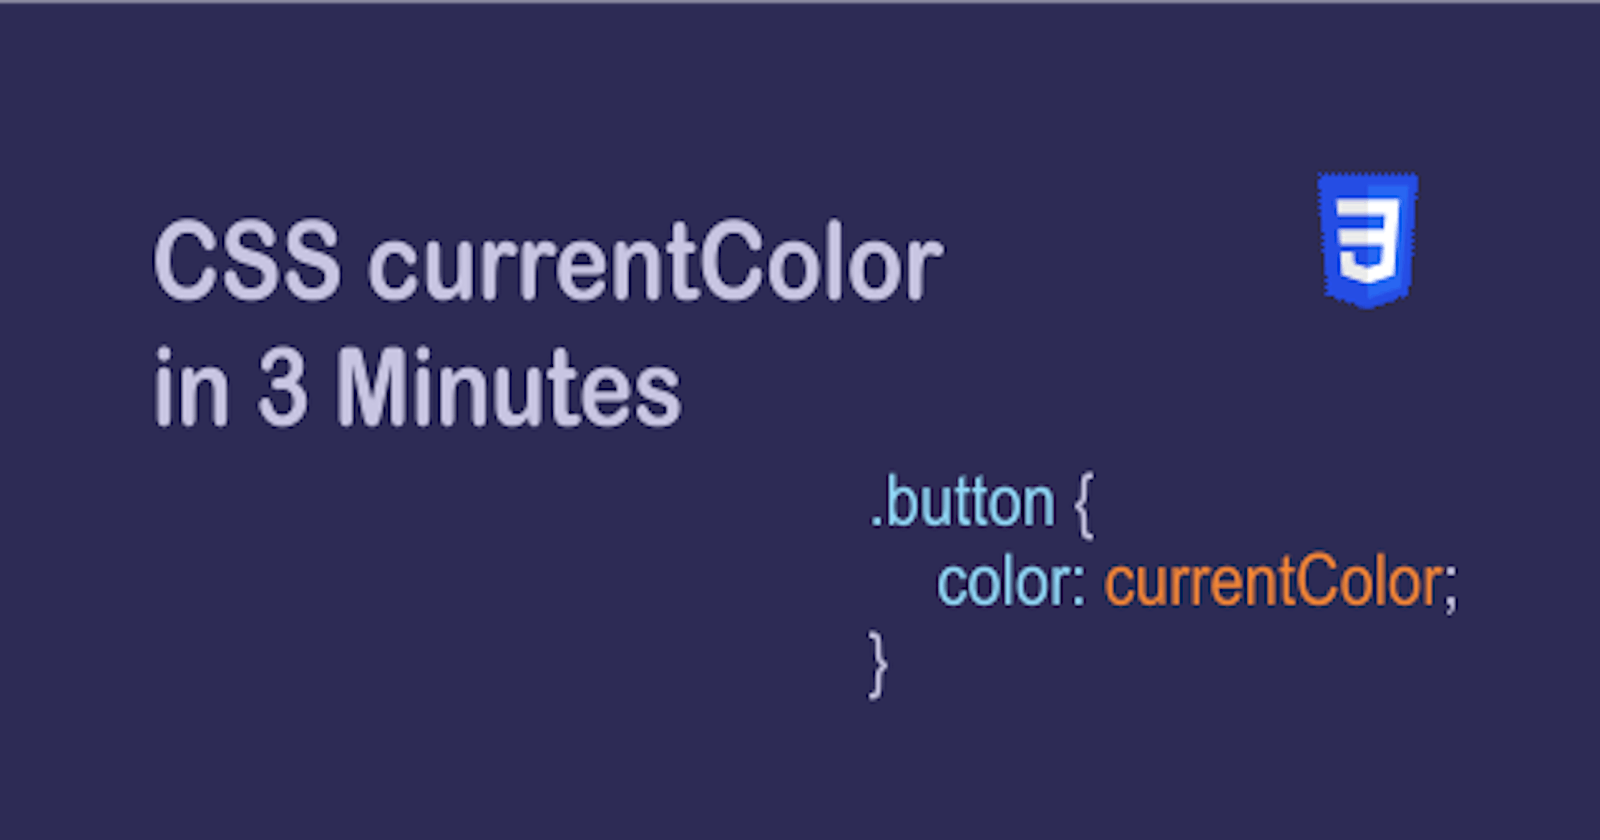 CSS currentColor in 3 minutes